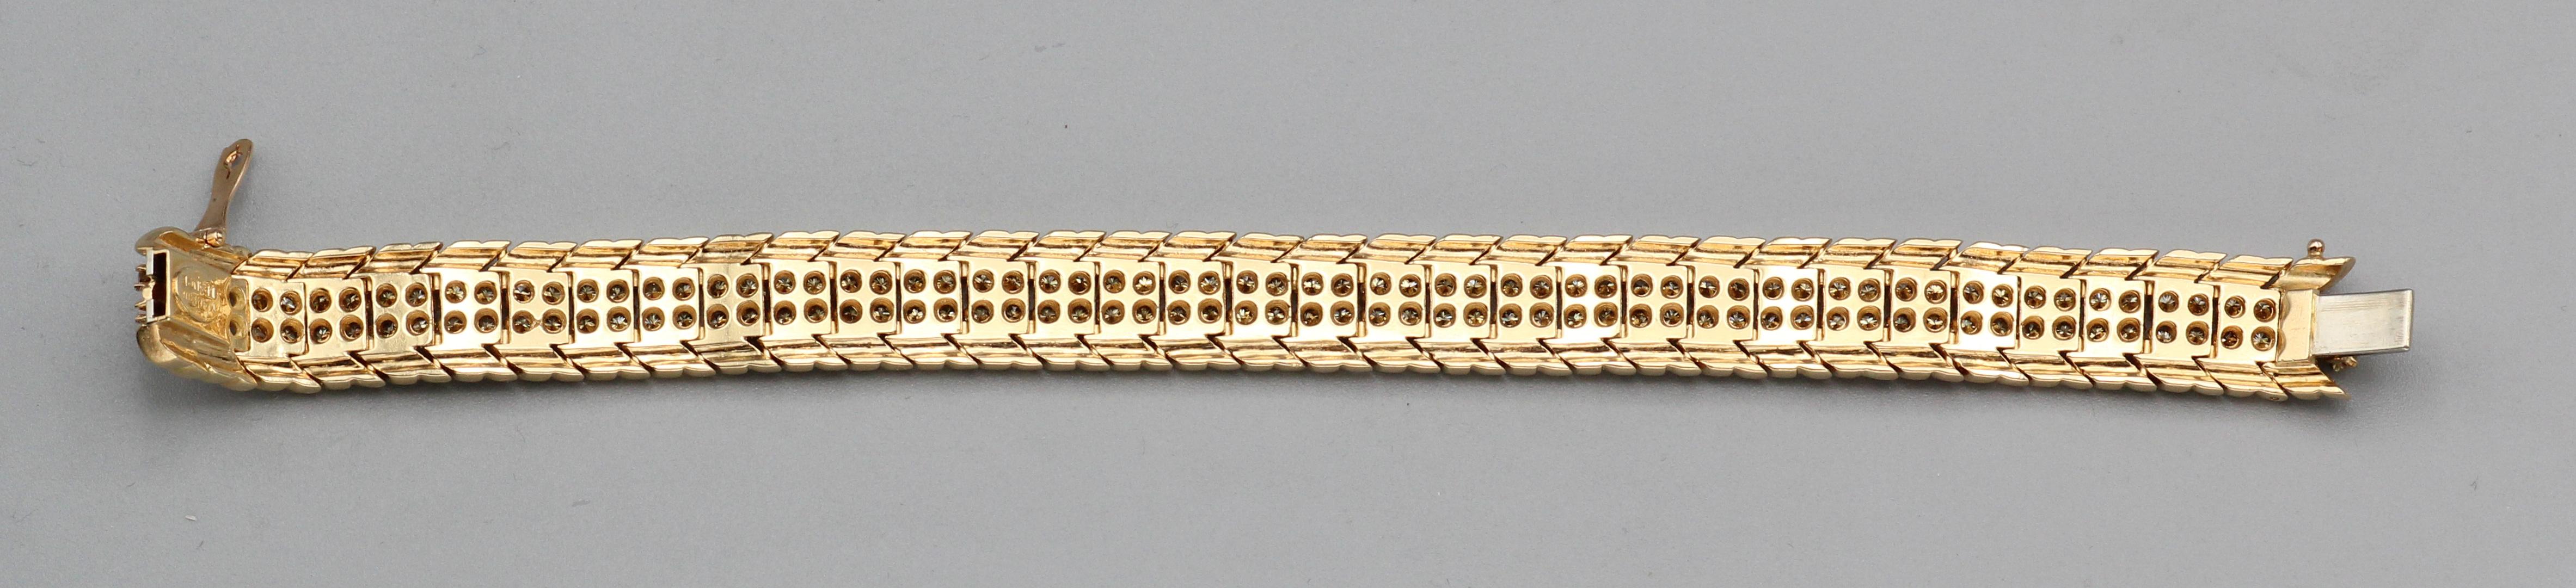 Verdura Yellow Diamond 18k Gold Link Bracelet In Excellent Condition For Sale In New York, NY